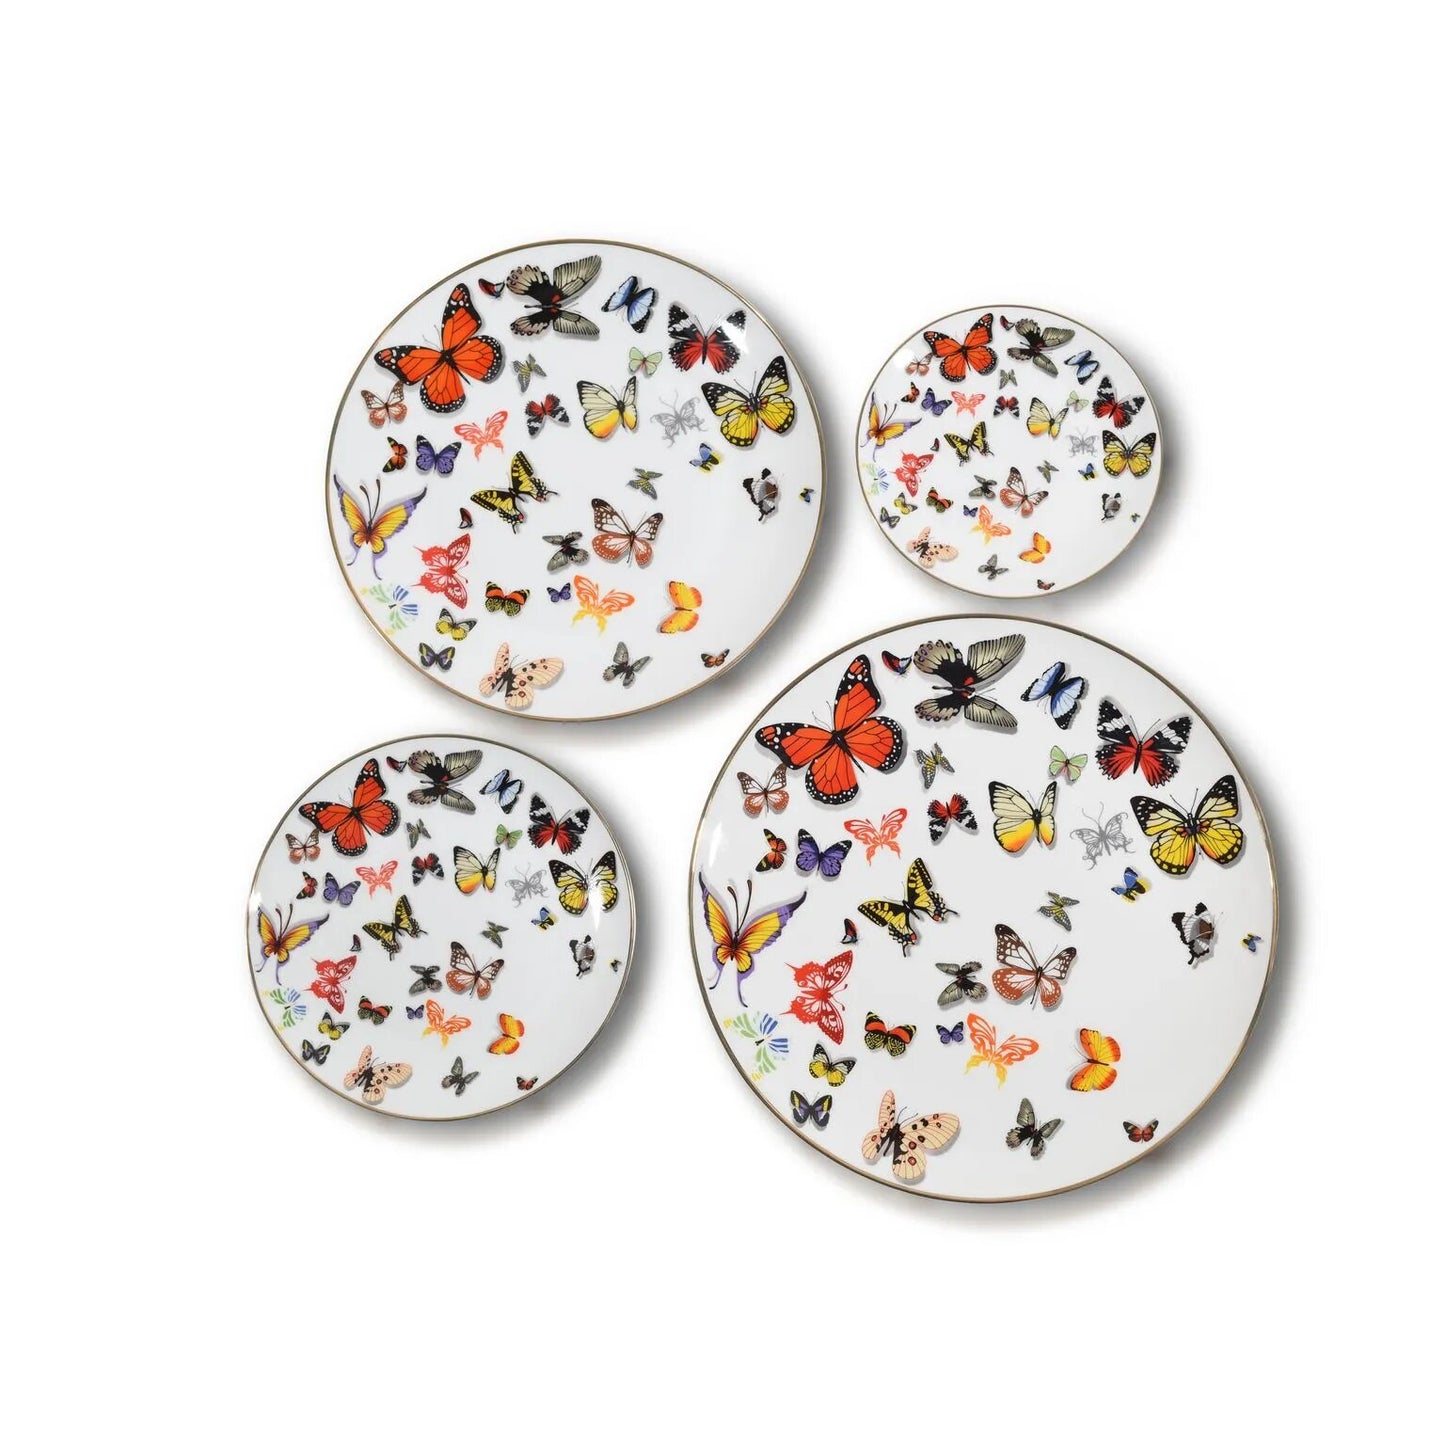 Butterfly Printed 24-pc Dinnerware Set, service for 12 people